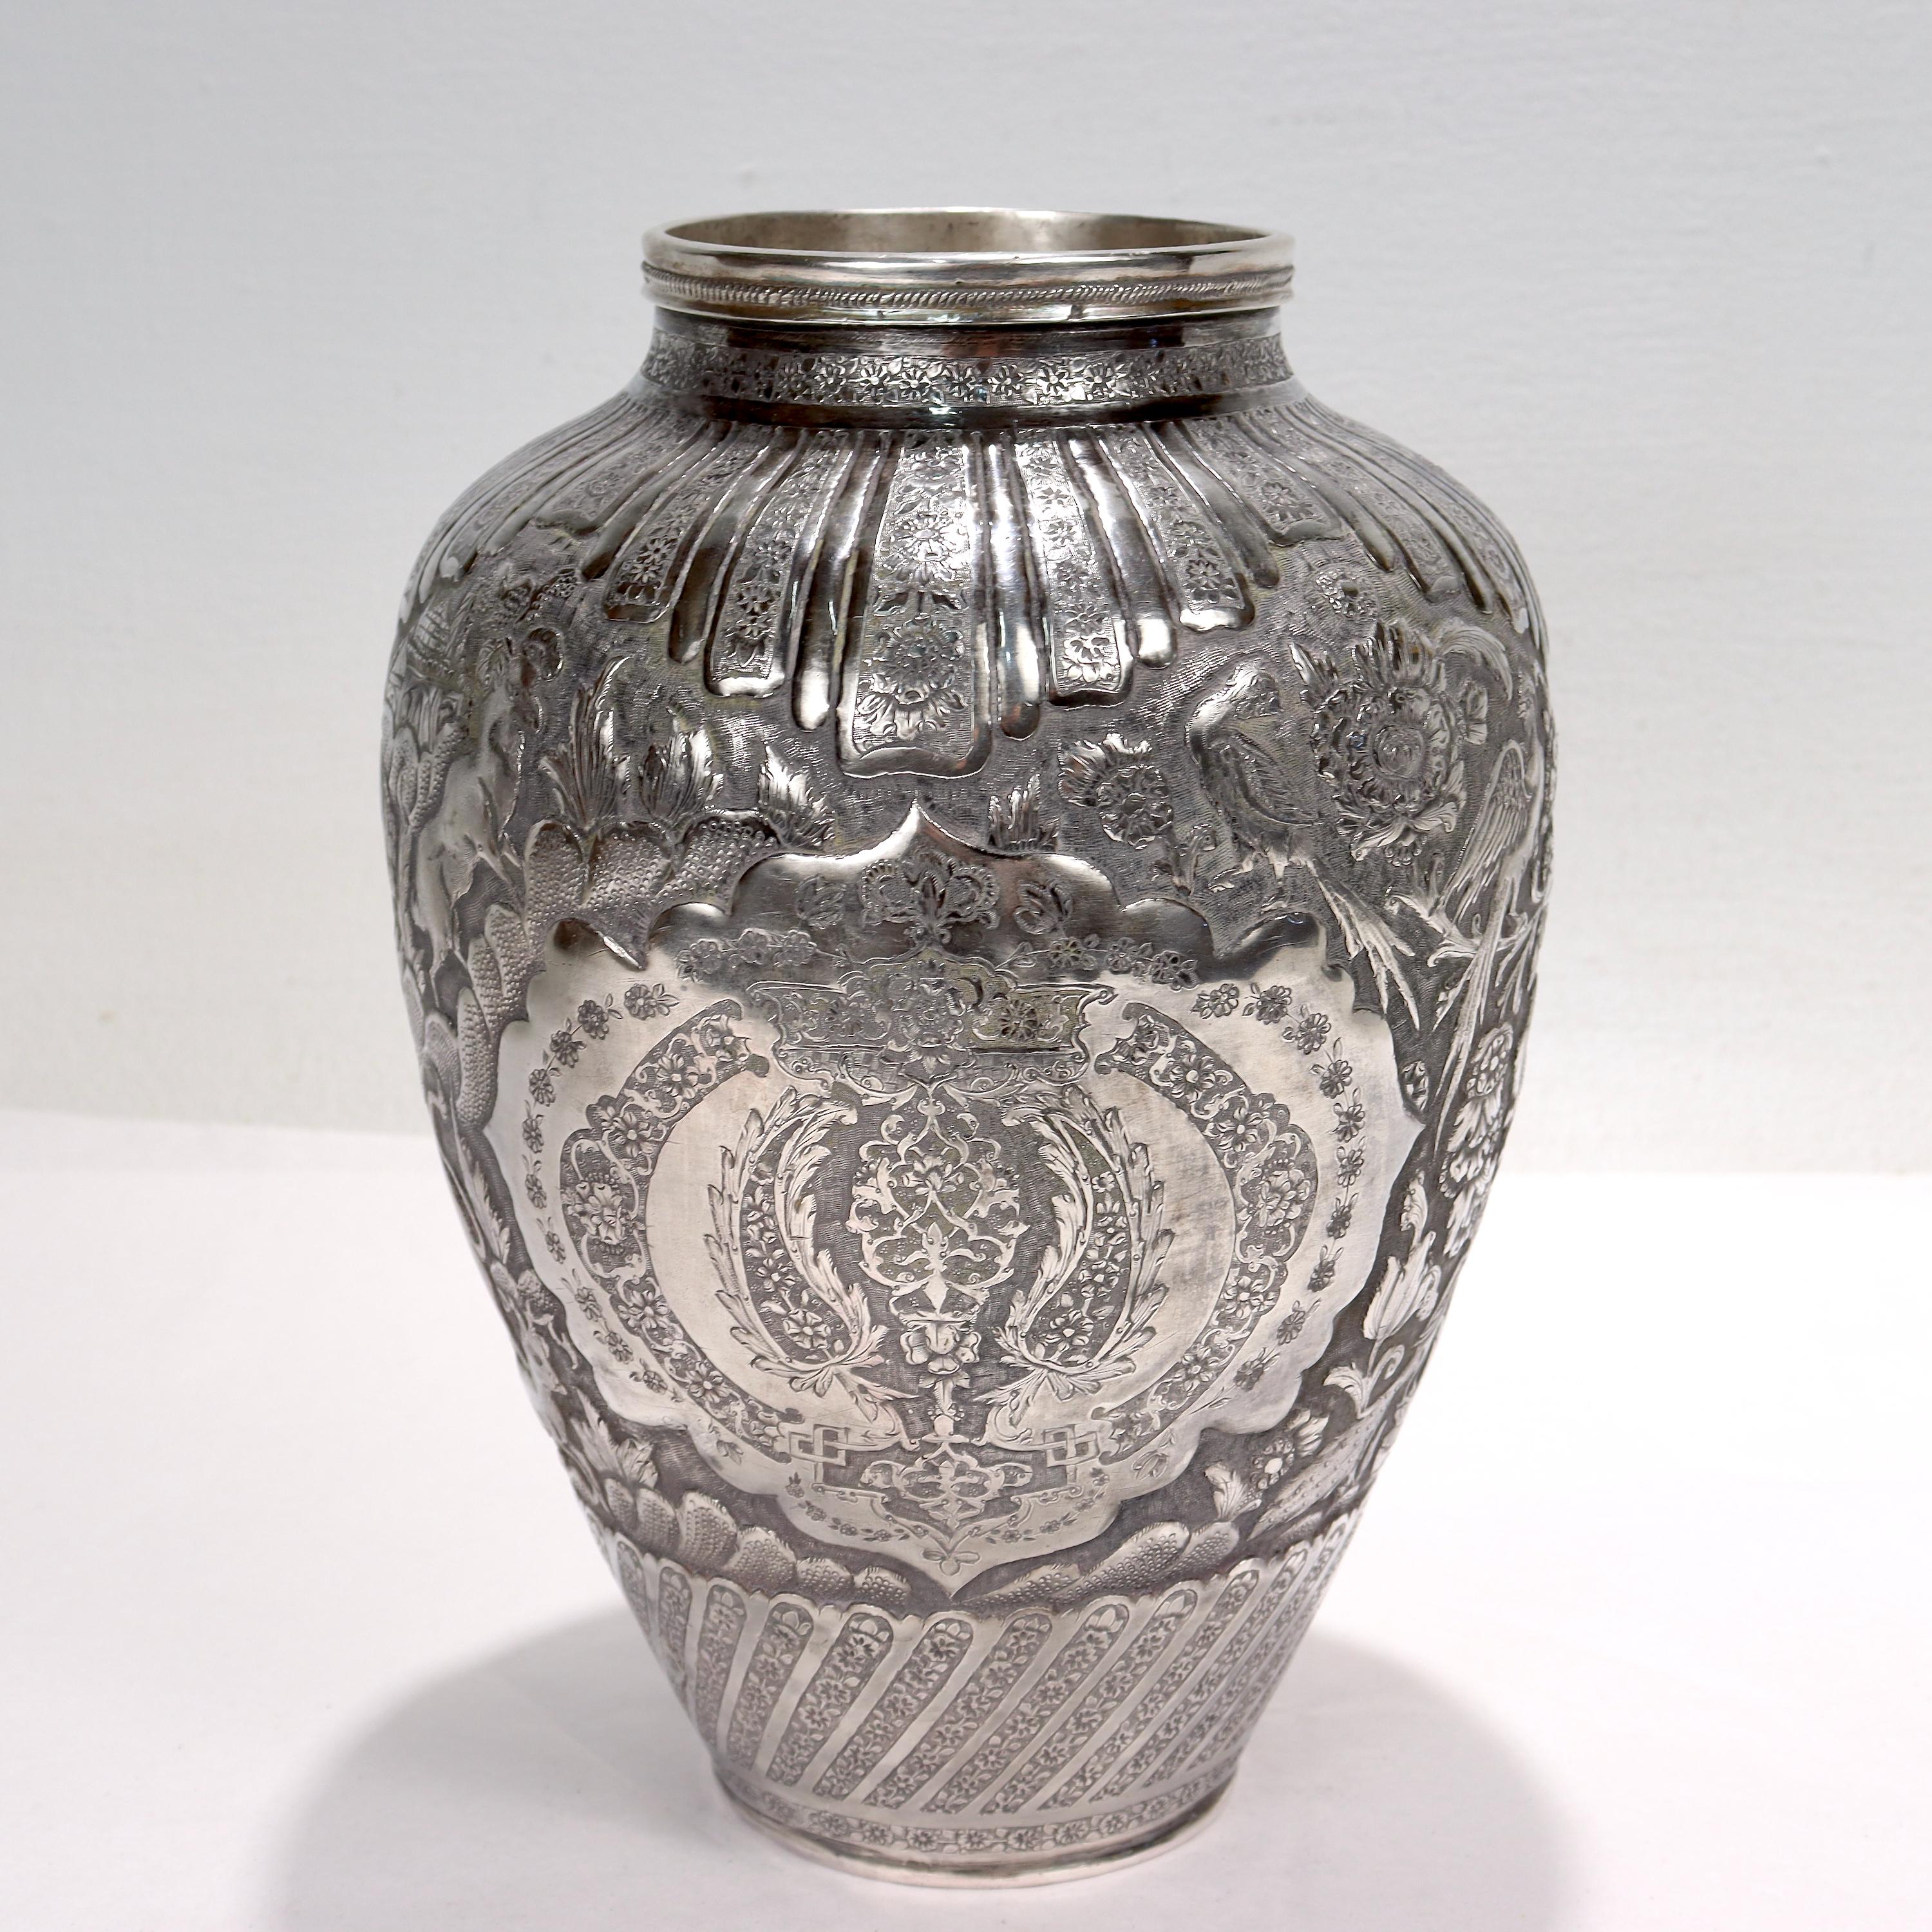 British Colonial Old or Antique Signed Islamic Ottoman or Persian Repousse Silver Vase For Sale